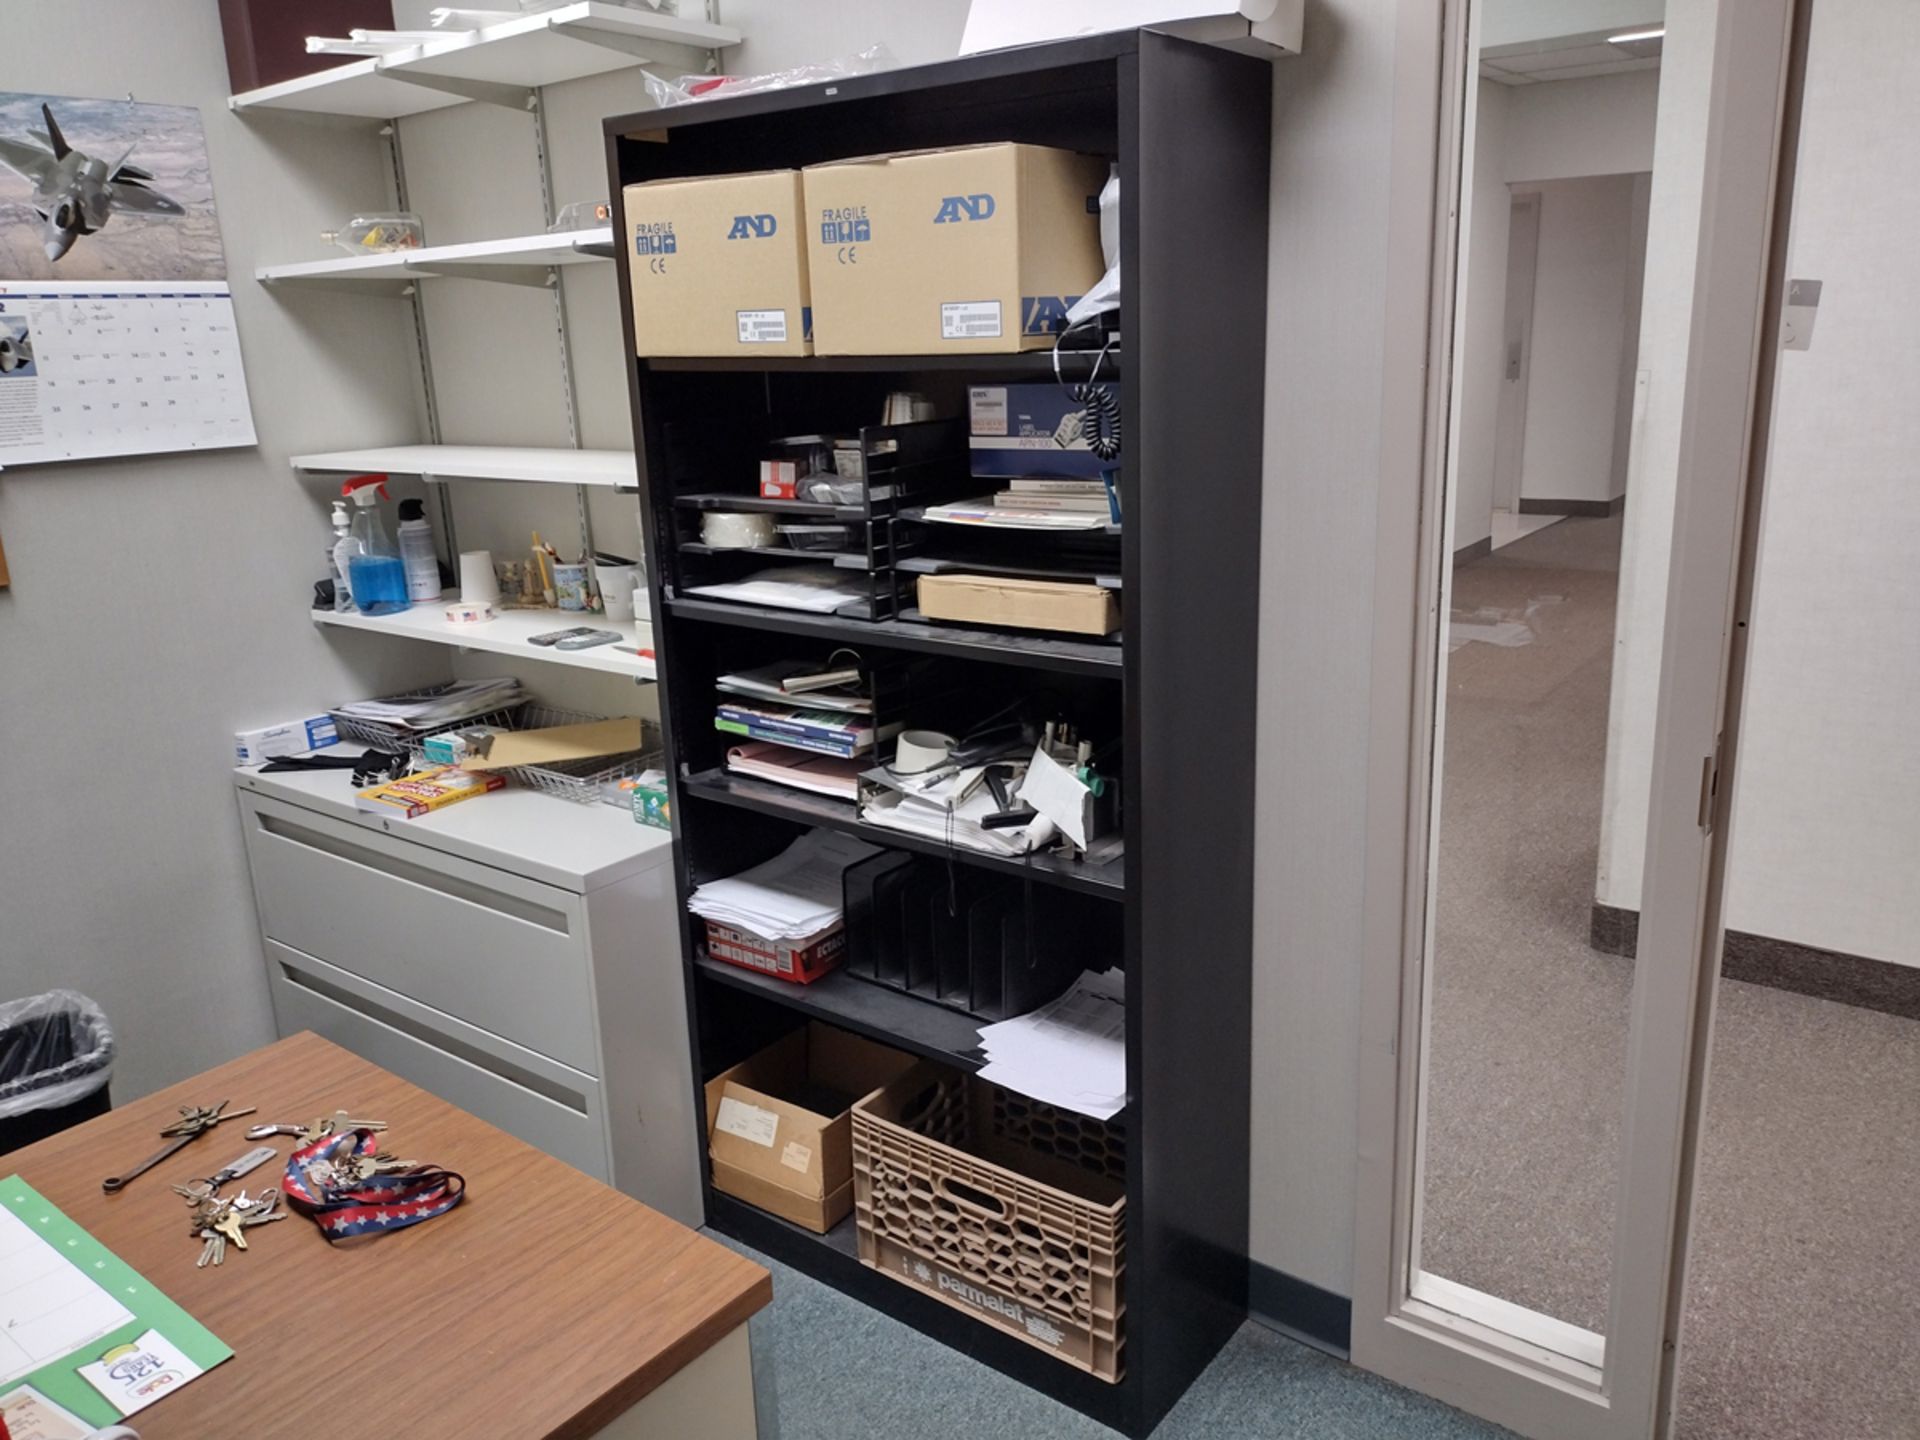 Group of Office Furniture Throughout Rooms - Image 12 of 17